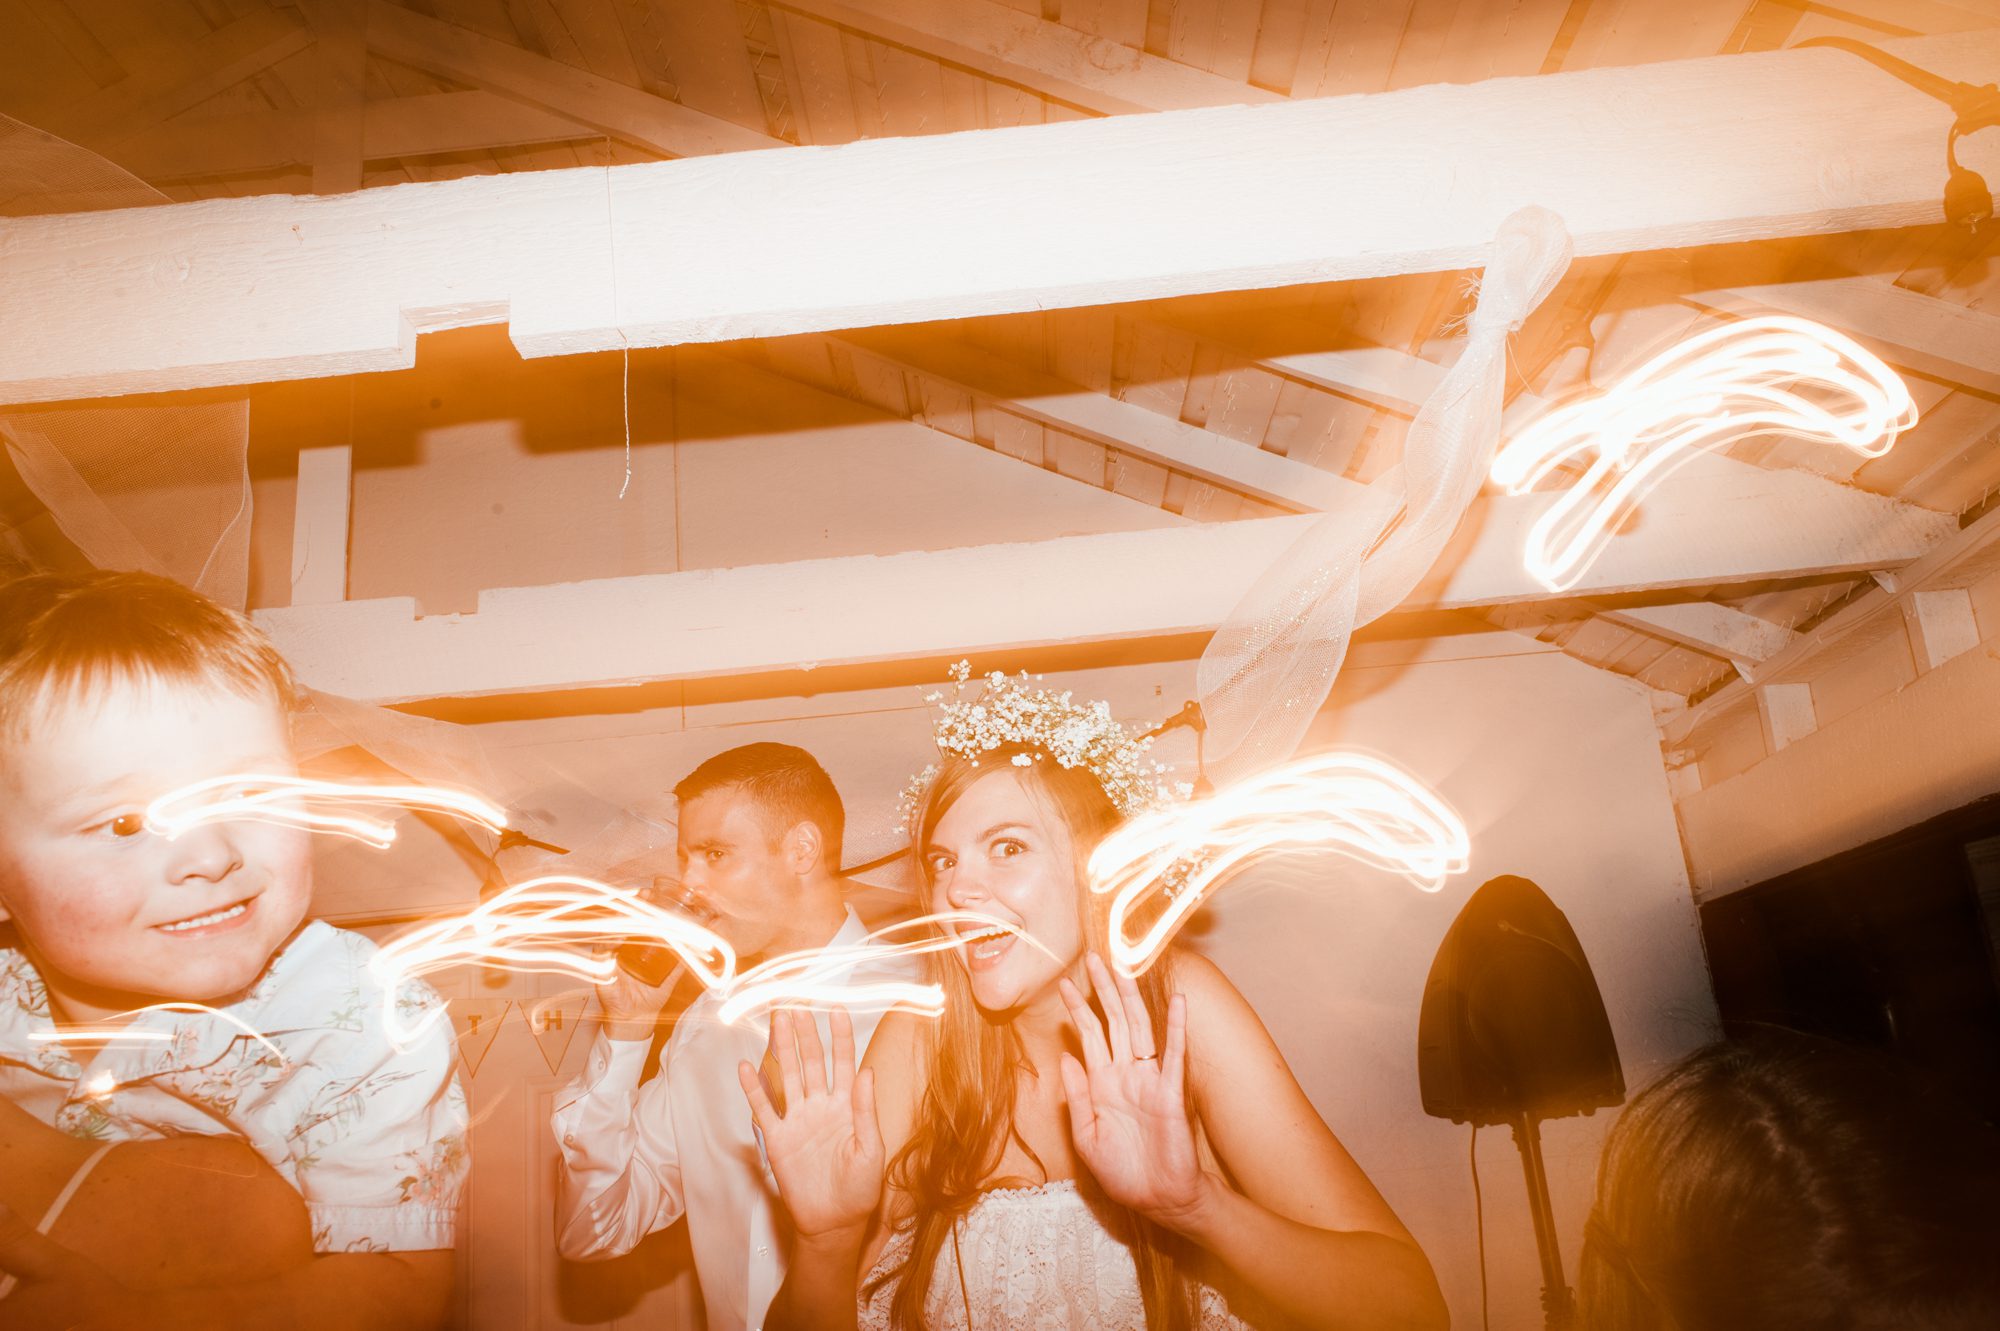 The bride busts a move during a wedding dance party. By Sou'Wester wedding photographer Briana Morrison